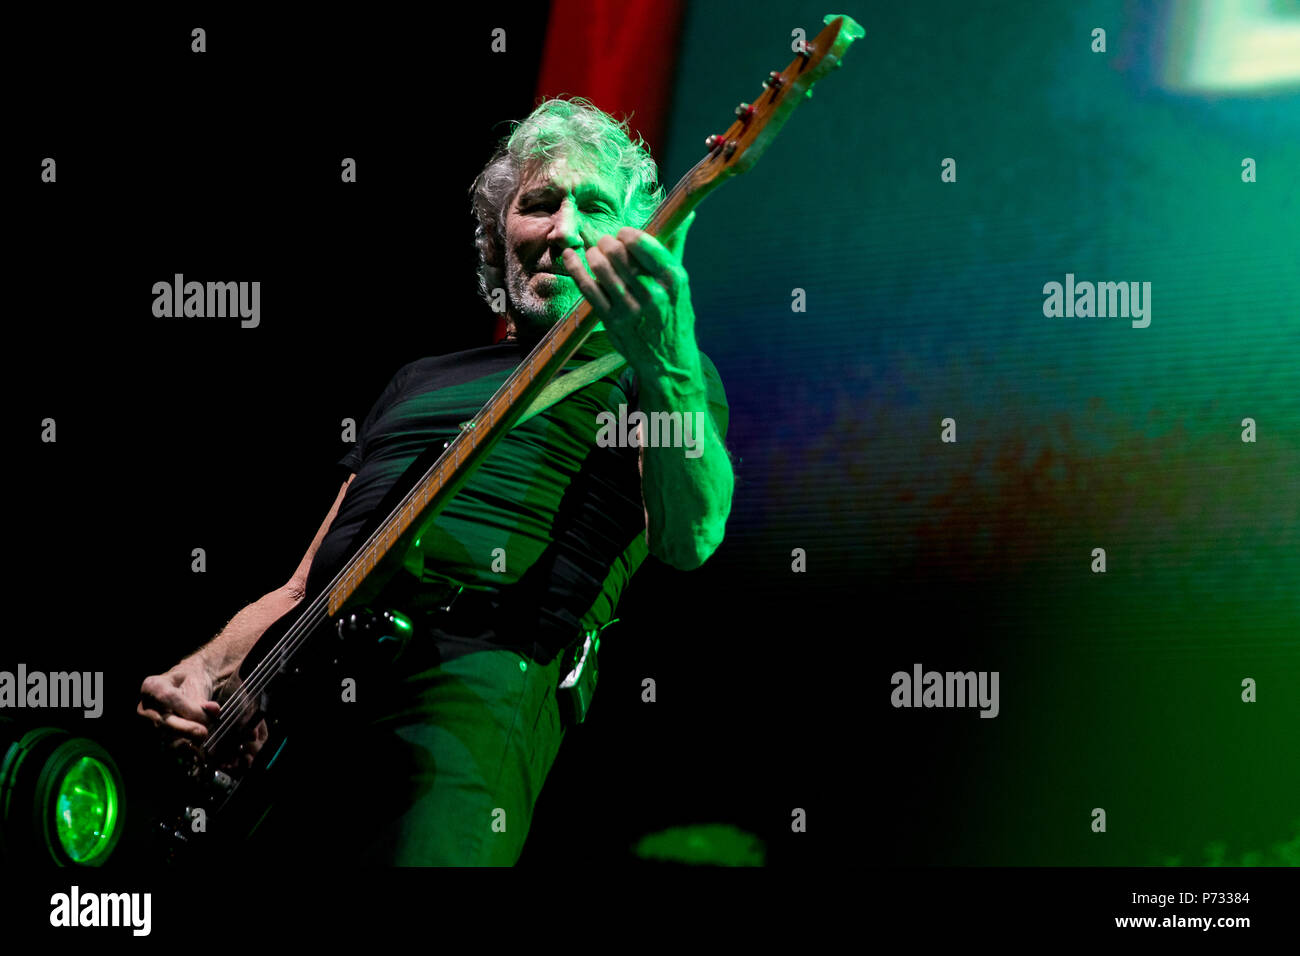 Roger Waters (Pink Floyd) performs live on stage during his Us + Them tour at the Manchester Arena in Manchester, UK, 3rd June 2018. Stock Photo